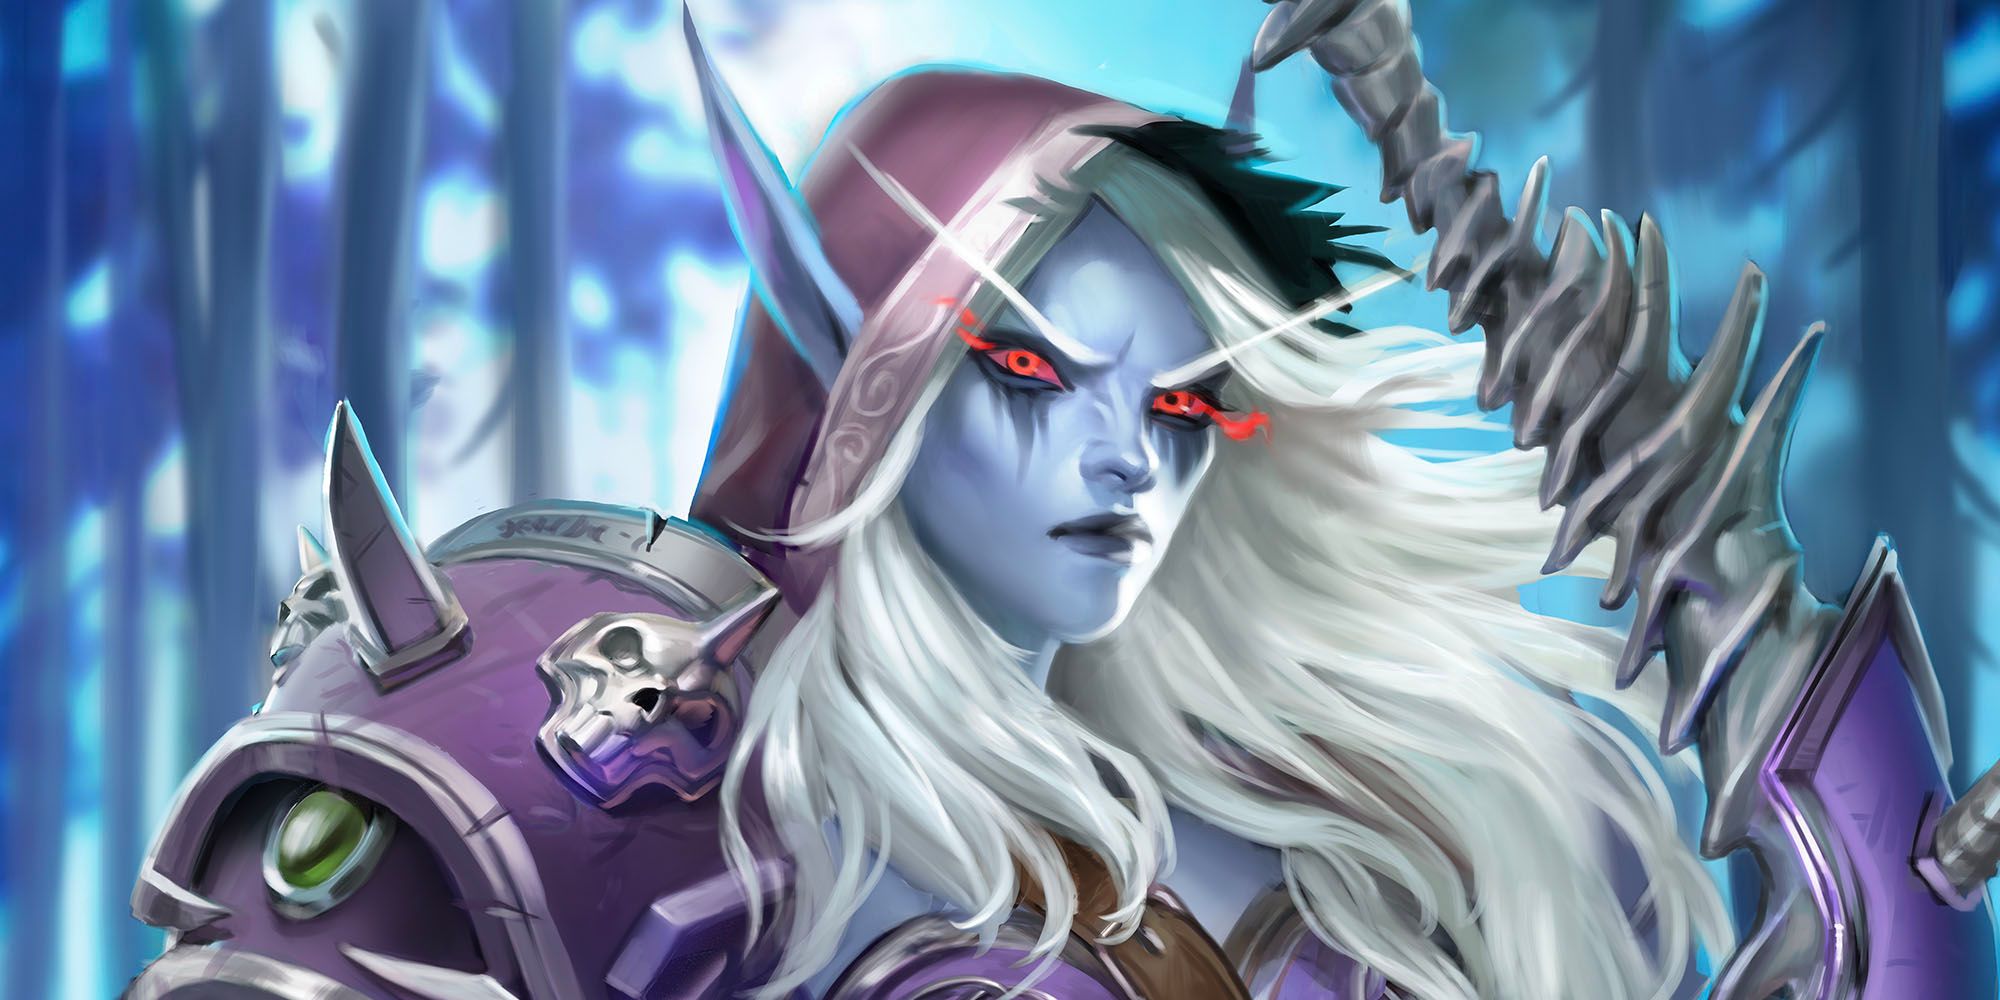 Sylvanas looking for the enemy